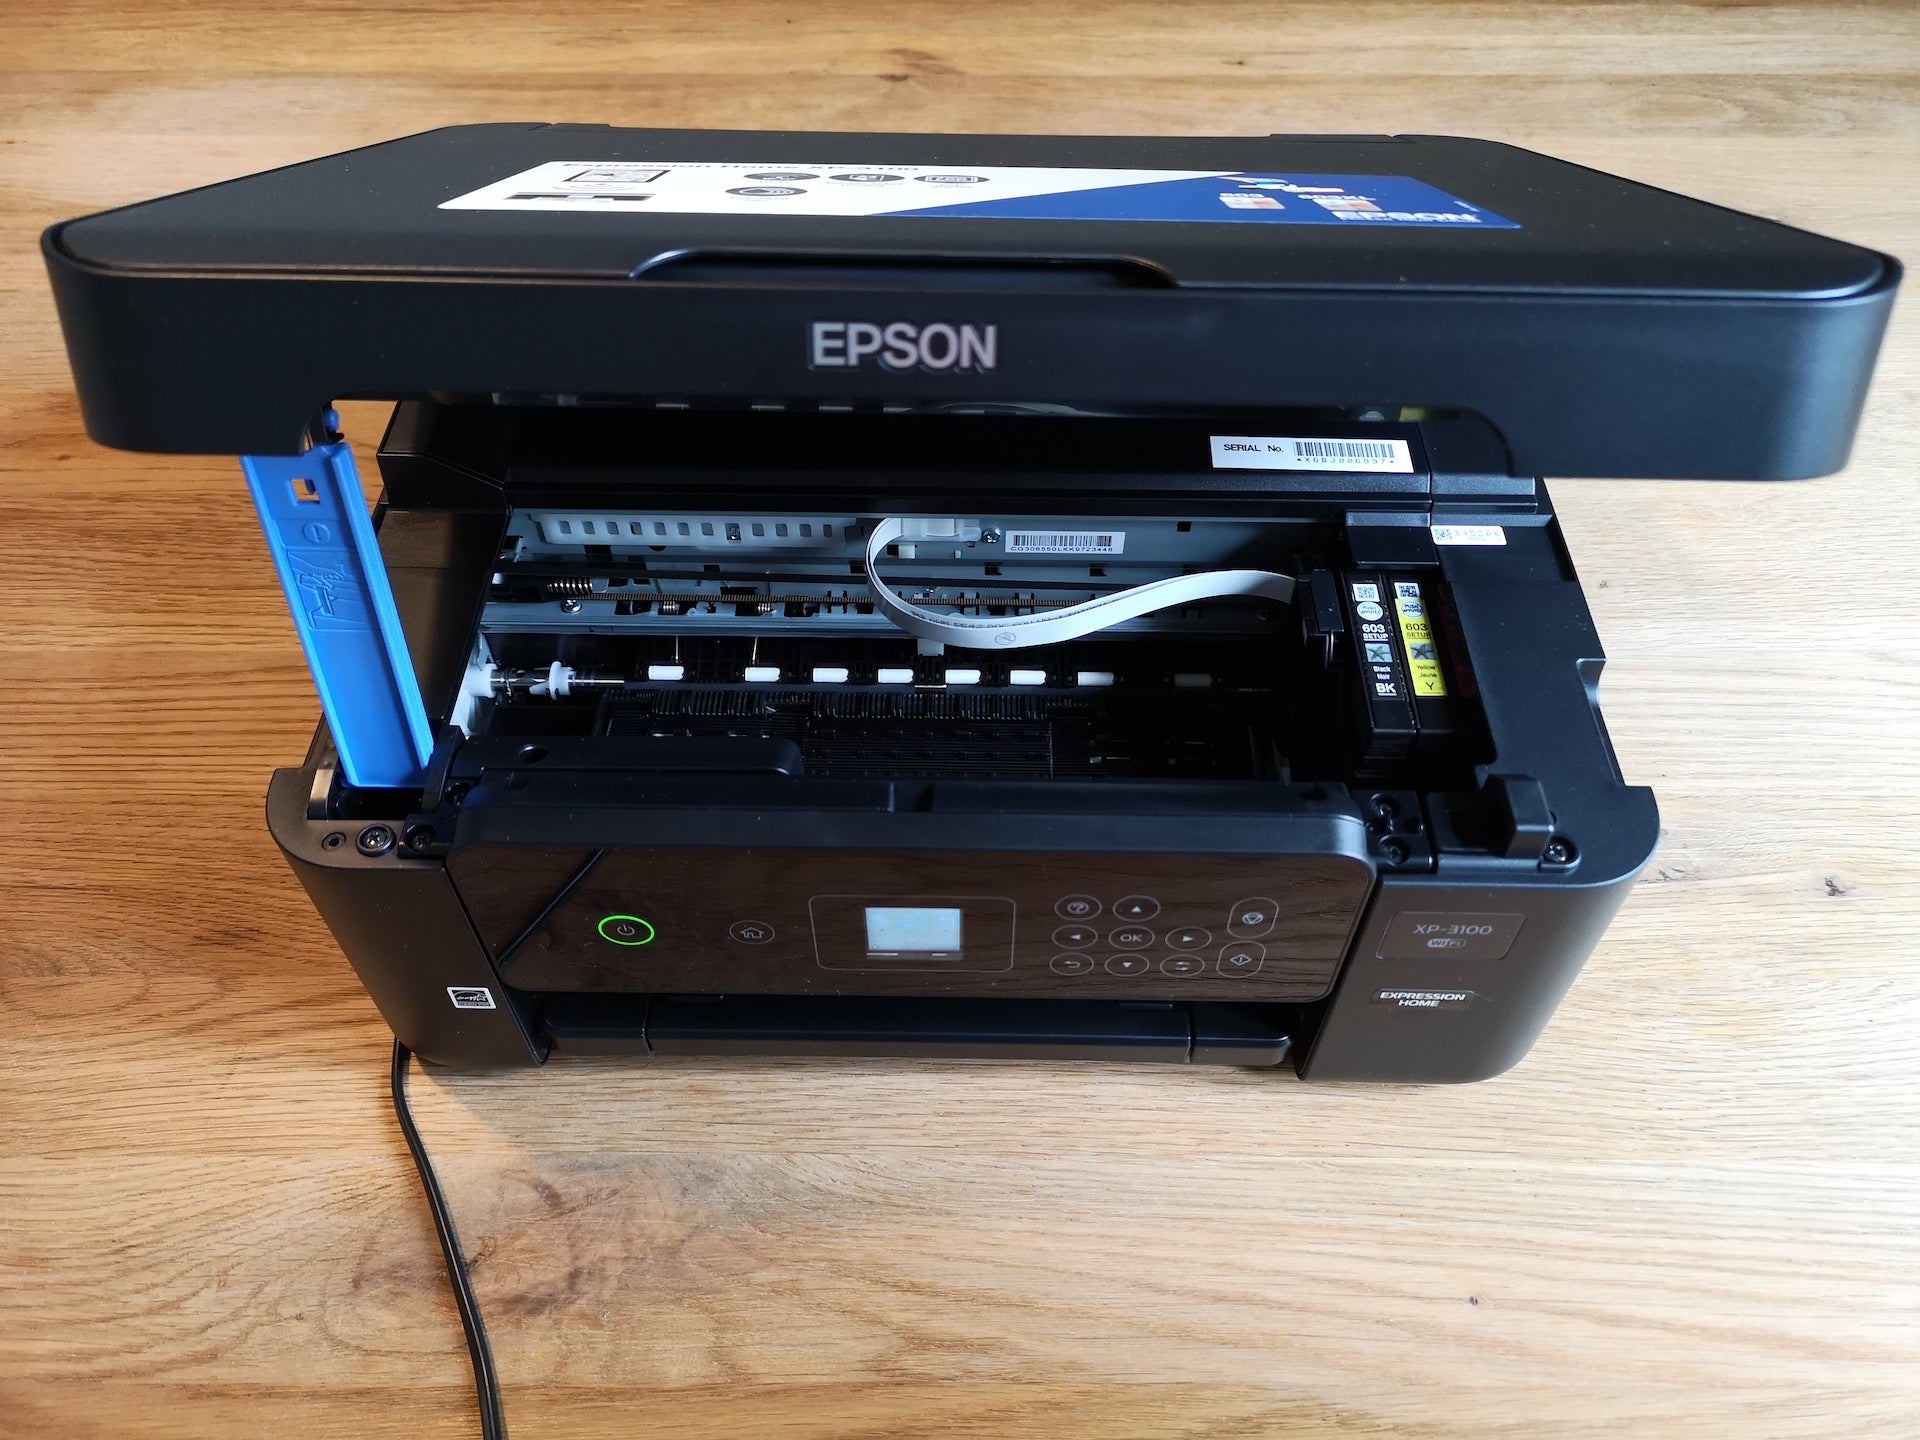 Epson XP-3100 Review | Trusted Reviews